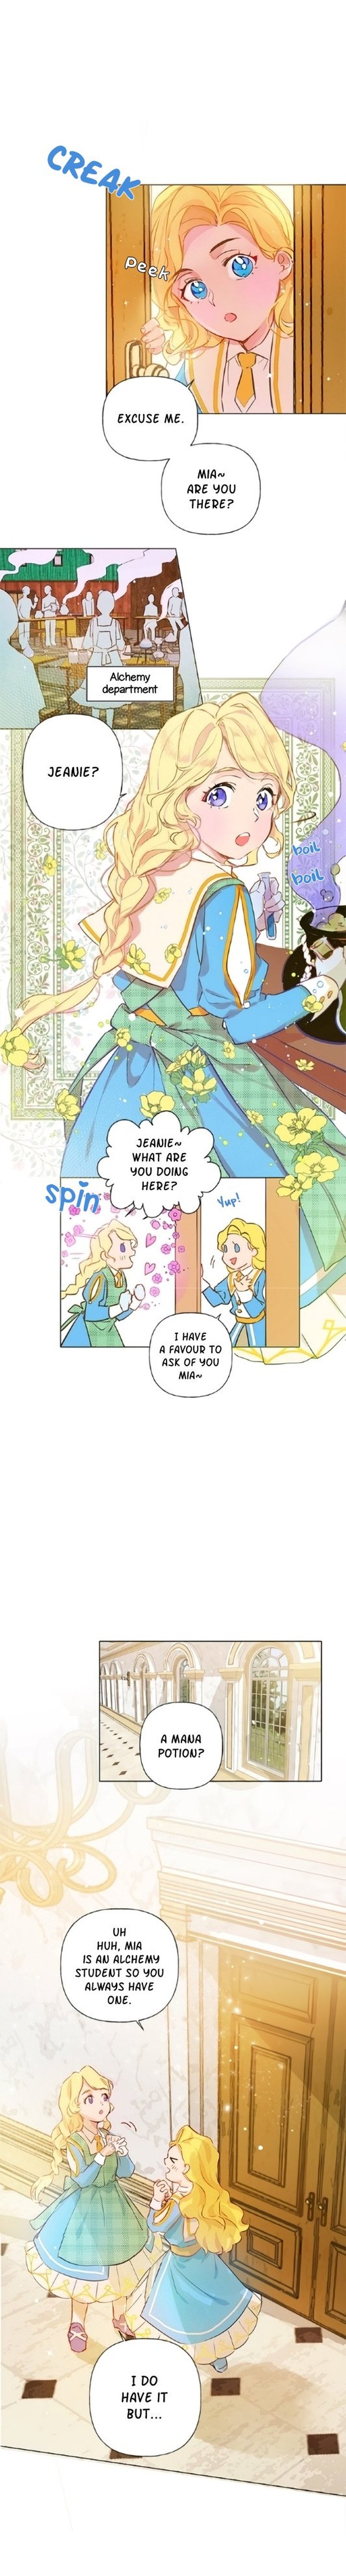 the-golden-haired-elementalist-chap-4-5